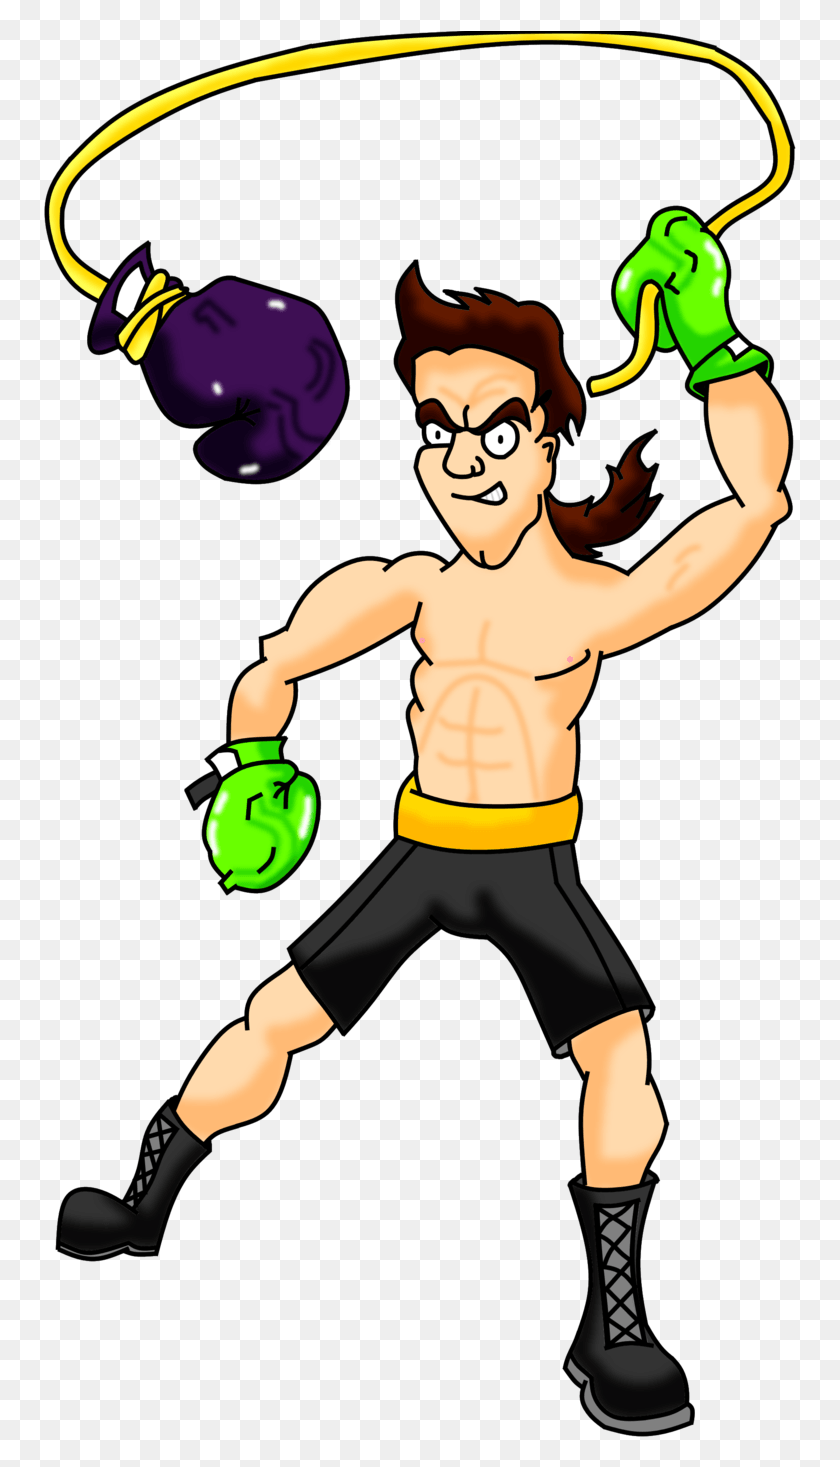 753x1407 Png Изображение - Punchout Super Punchout Wii Area Artwork Image Cartoon, Person, Human, Sphere Hd Png Download